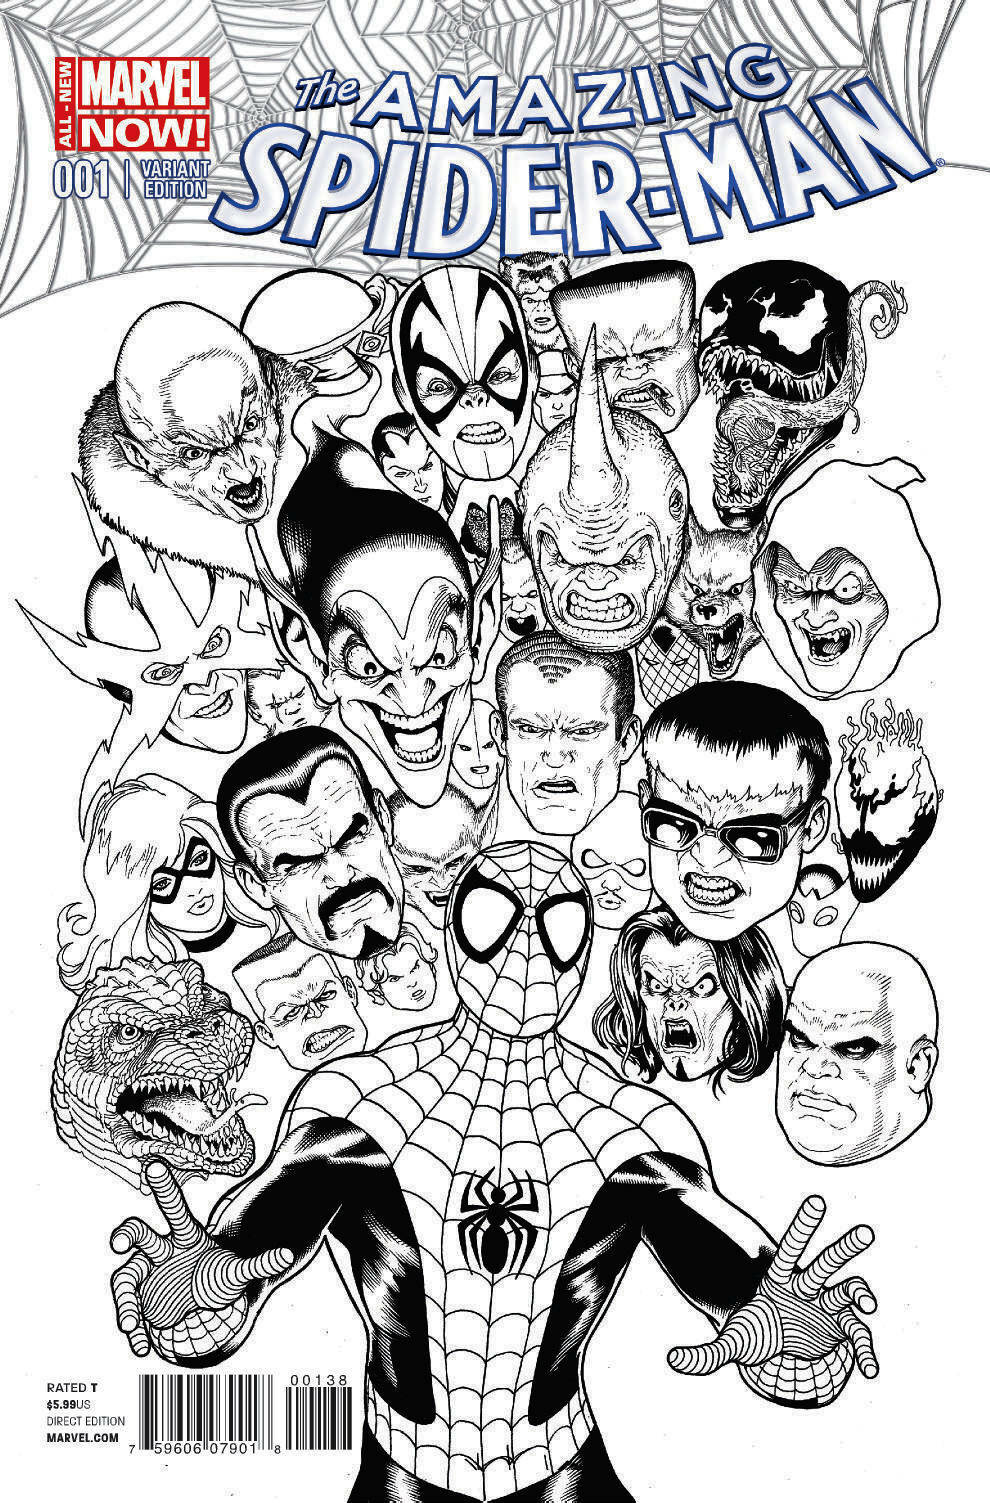 Amazing Spider-Man #1 (2014) Kevin Maguire Sketch Variant